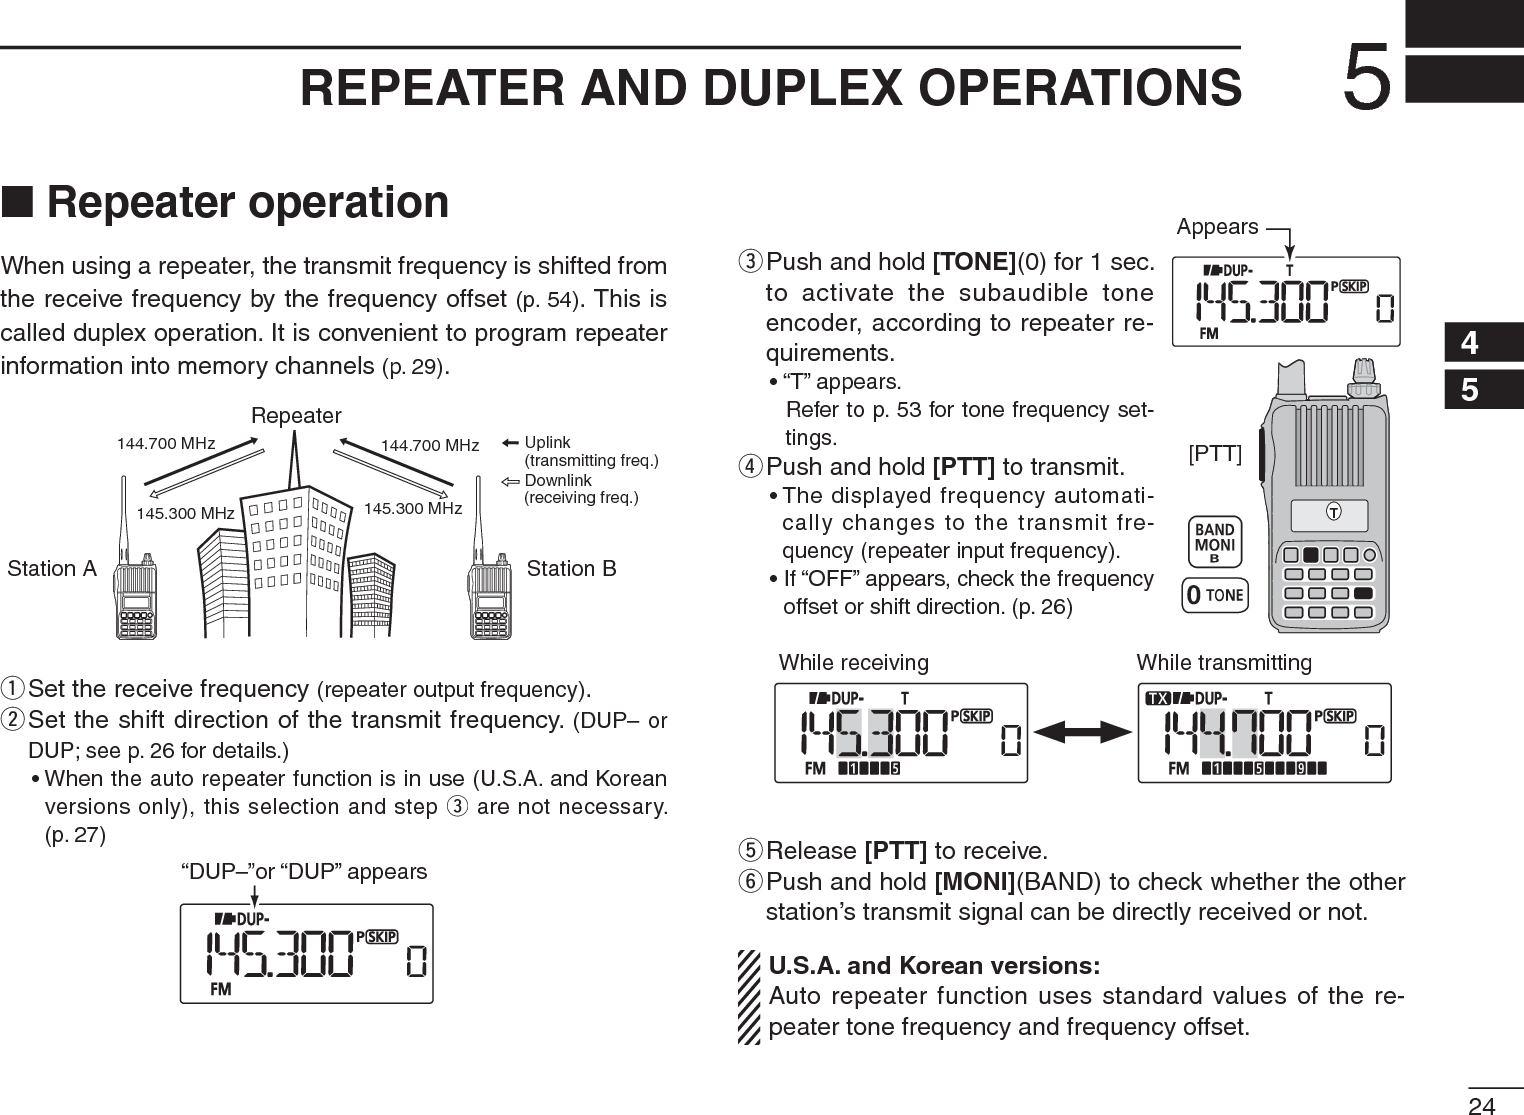 245REPEATER AND DUPLEX OPERATIONS12345678910111213141516171819N Repeater operationWhen using a repeater, the transmit frequency is shifted from the receive frequency by the frequency offset (p. 54). This is called duplex operation. It is convenient to program repeater information into memory channels (p. 29).Station A Station BRepeater145.300 MHz144.700 MHz 144.700 MHz145.300 MHzUplinkDownlink(transmitting freq.)(receiving freq.)q  Set the receive frequency (repeater output frequency).w  Set the shift direction of the transmit frequency. (DUP– or DUP; see p. 26 for details.)• When the auto repeater function is in use (U.S.A. and Korean versions only), this selection and step e are not necessary. (p. 27)“DUP–”or “DUP” appears[PTT]TAppearse  Push and hold [TONE](0) for 1 sec. to activate the subaudible tone encoder, according to repeater re-quirements.• “T” appears.   Refer to p. 53 for tone frequency set-tings.rPush and hold [PTT] to transmit.• The displayed frequency automati-cally changes to the transmit fre-quency (repeater input frequency).• If “OFF” appears, check the frequency offset or shift direction. (p. 26)While receiving While transmittingtRelease [PTT] to receive.y  Push and hold [MONI](BAND) to check whether the other station’s transmit signal can be directly received or not. U.S.A. and Korean versions:Auto repeater function uses standard values of the re-peater tone frequency and frequency offset.